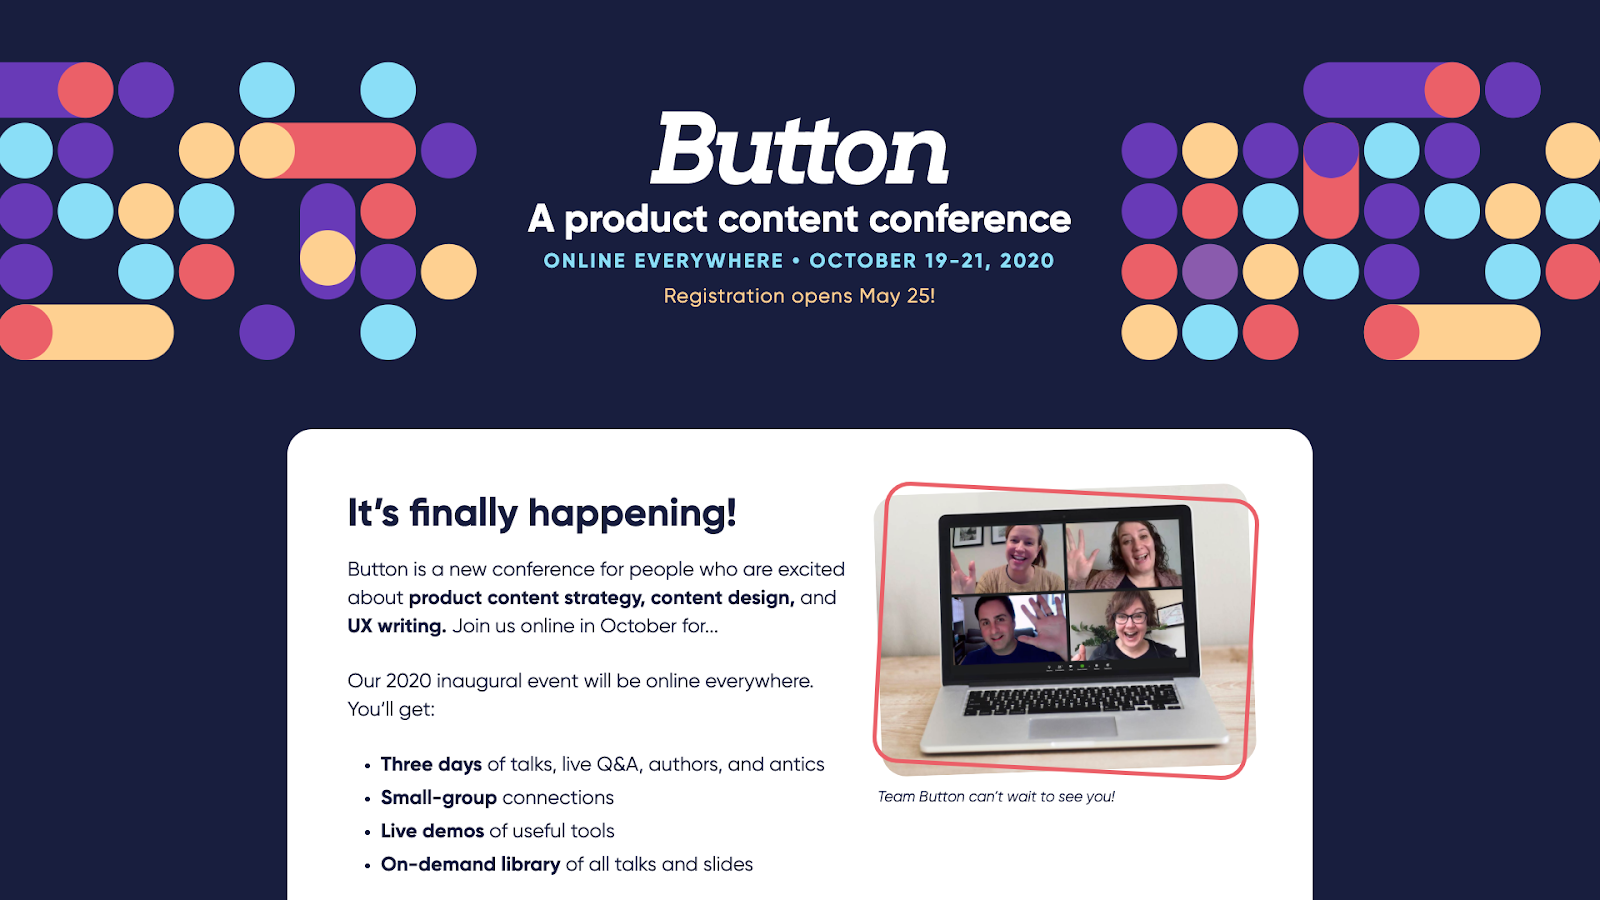 Splash page for the Button, virtual design conference.